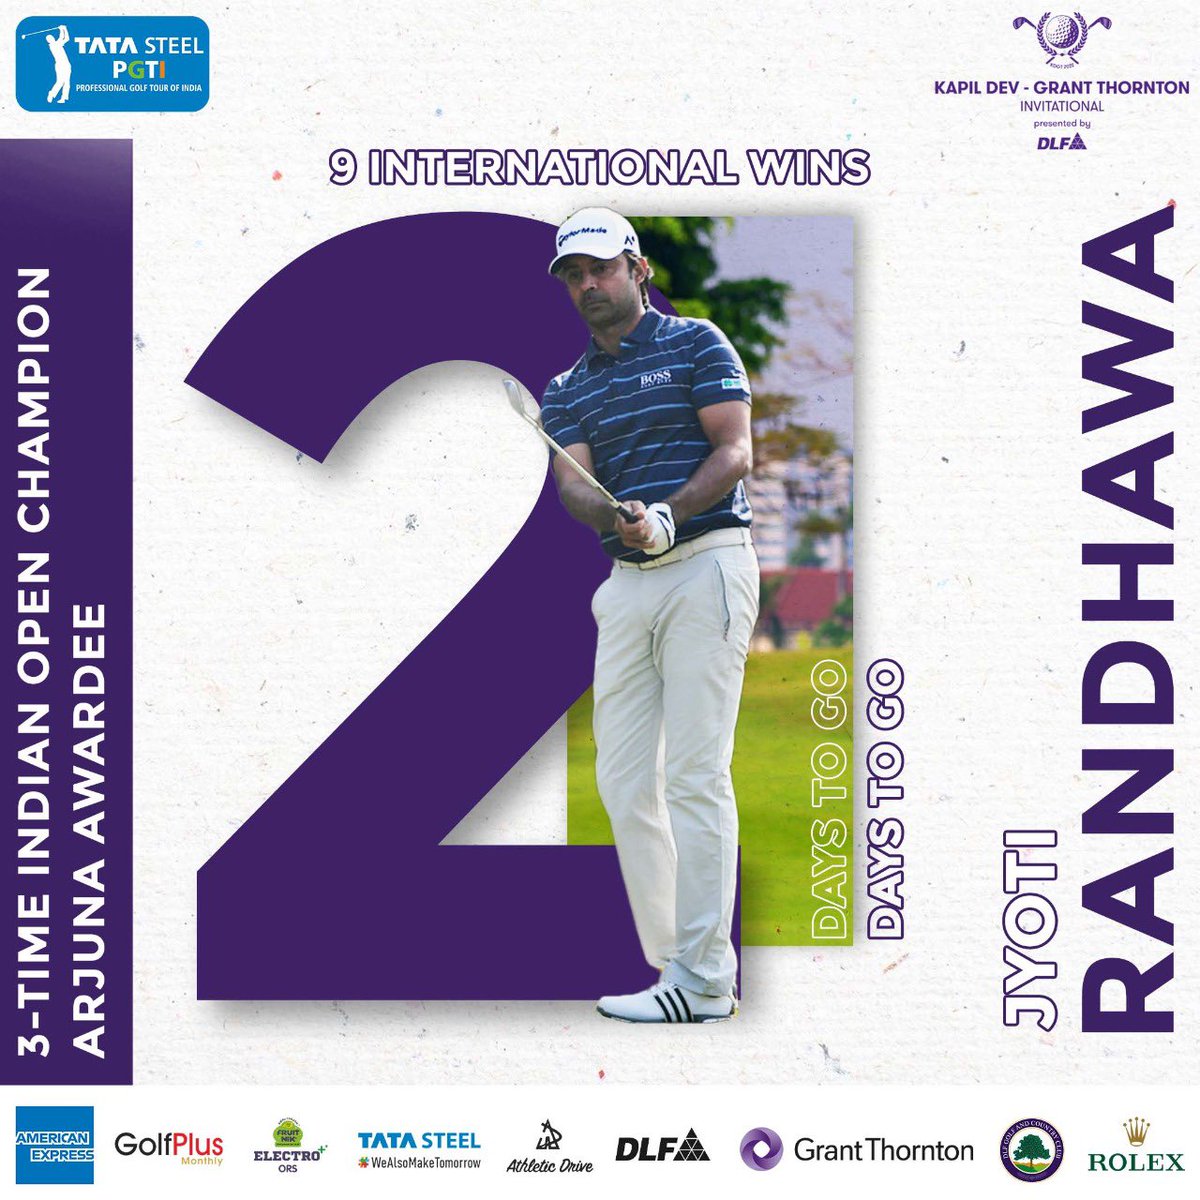 2 ᴅᴀʏꜱ ᴛᴏ ɢᴏ for @KDGT_golf to tee-off at the DLF Golf & CC, #gurugram . Do not miss the chance to witness India’s top #professionalgolfers in action. #Golf #sports #golfing #golfshot #golfpro #golfinIndia #KapilDev #KDGT #KDGTgolf #GOBeyondForGolf